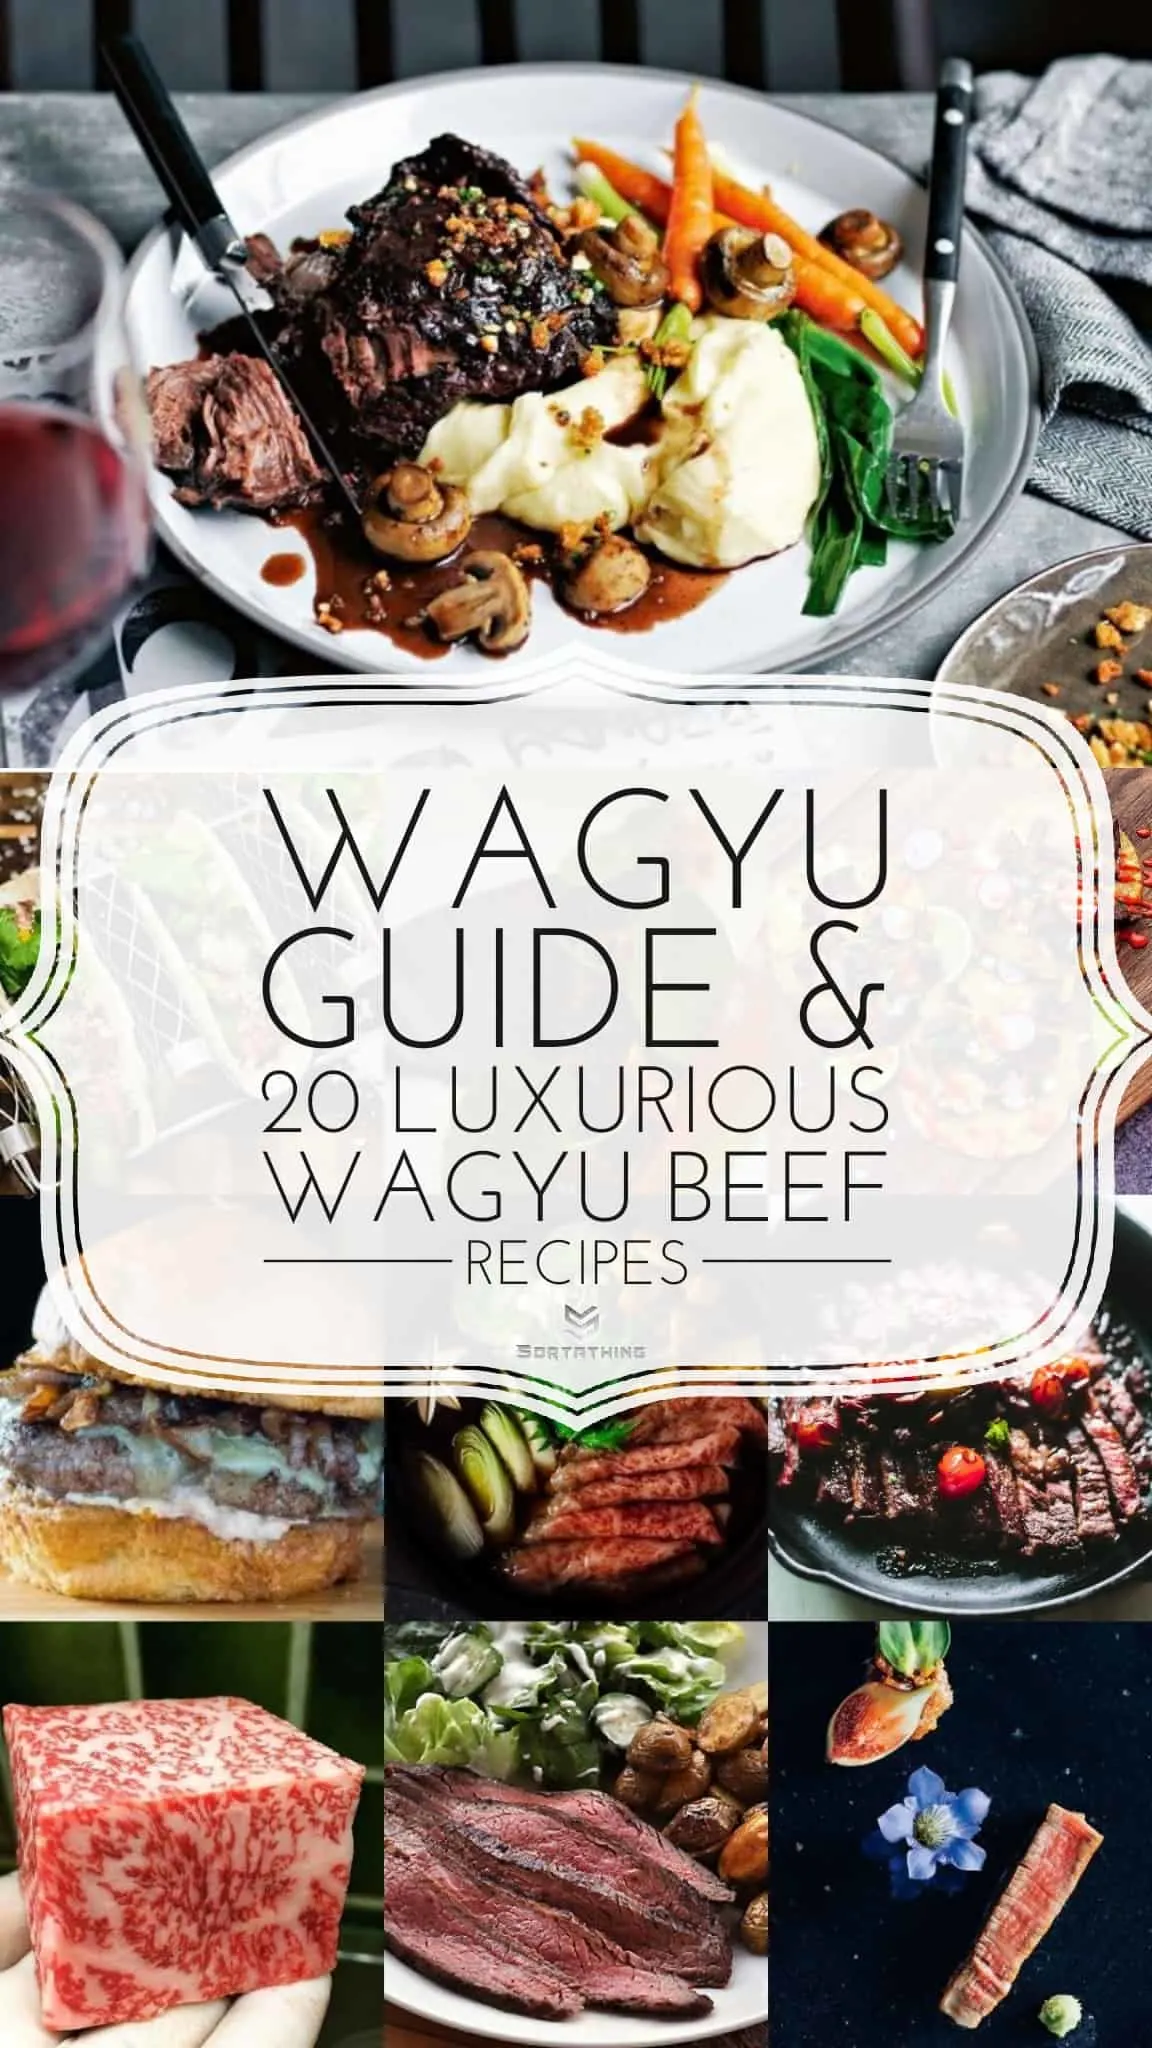 Wagyu Beef Guide and Recipes